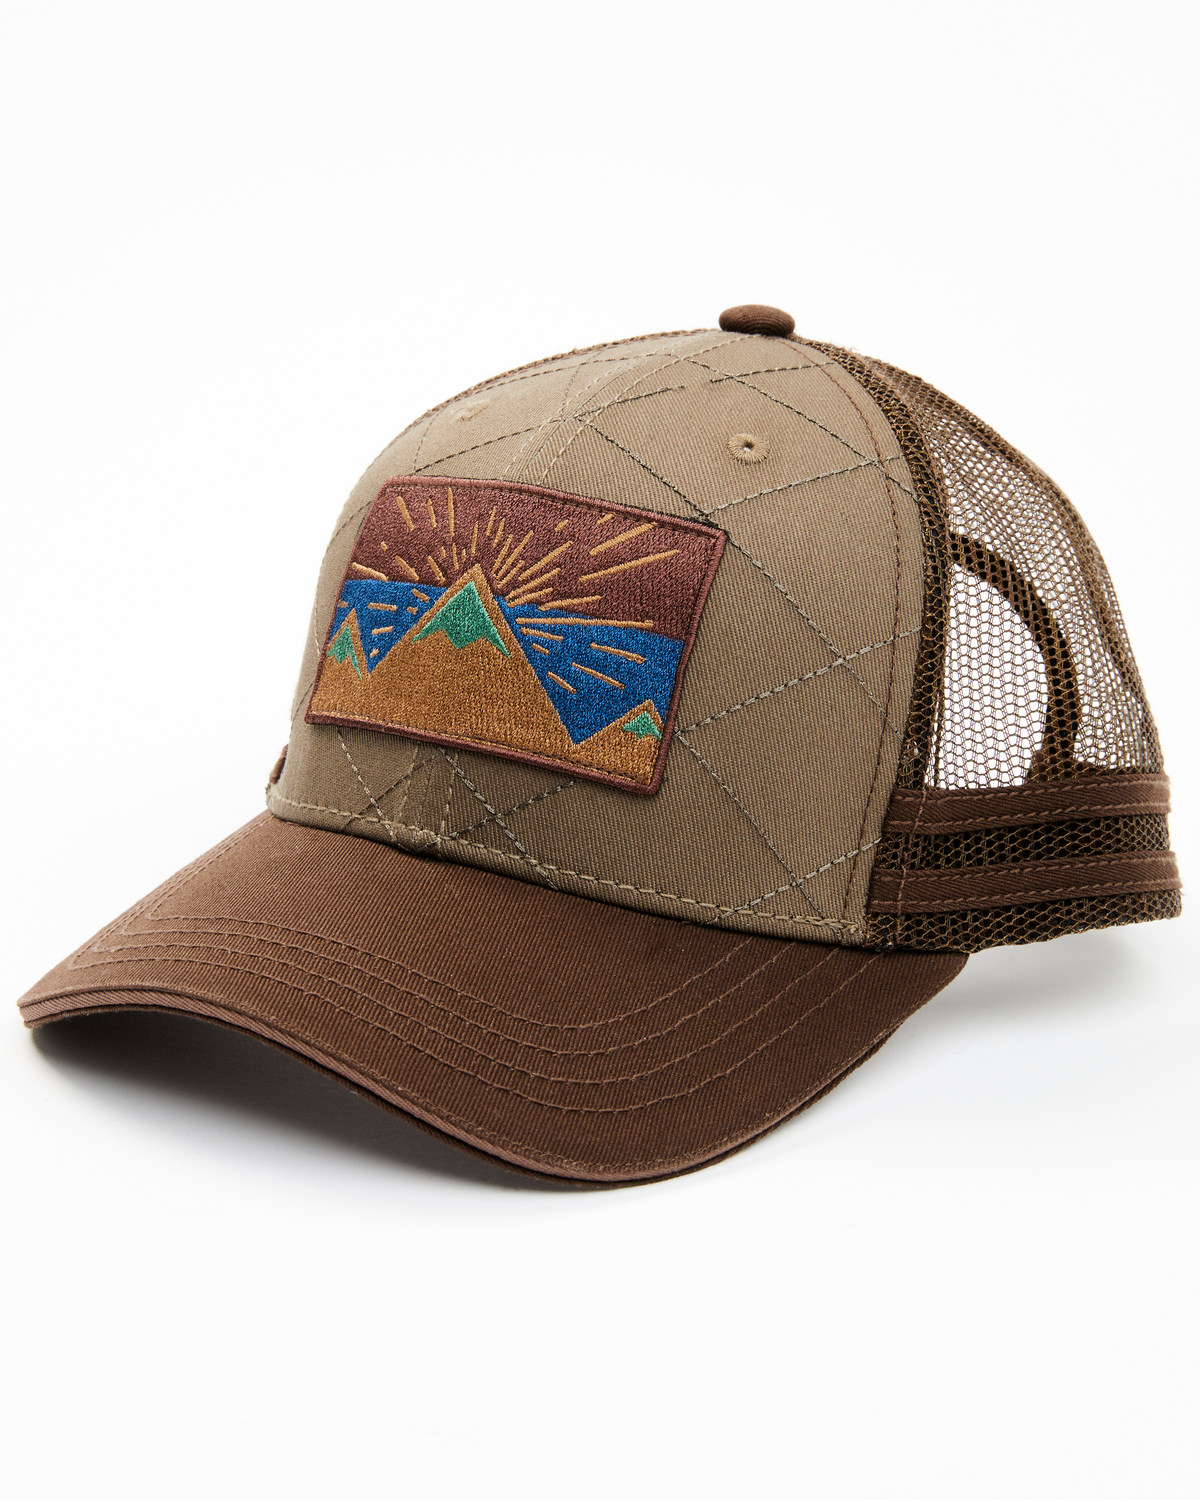 Brothers and Sons Men's Mountain Range Ball Cap